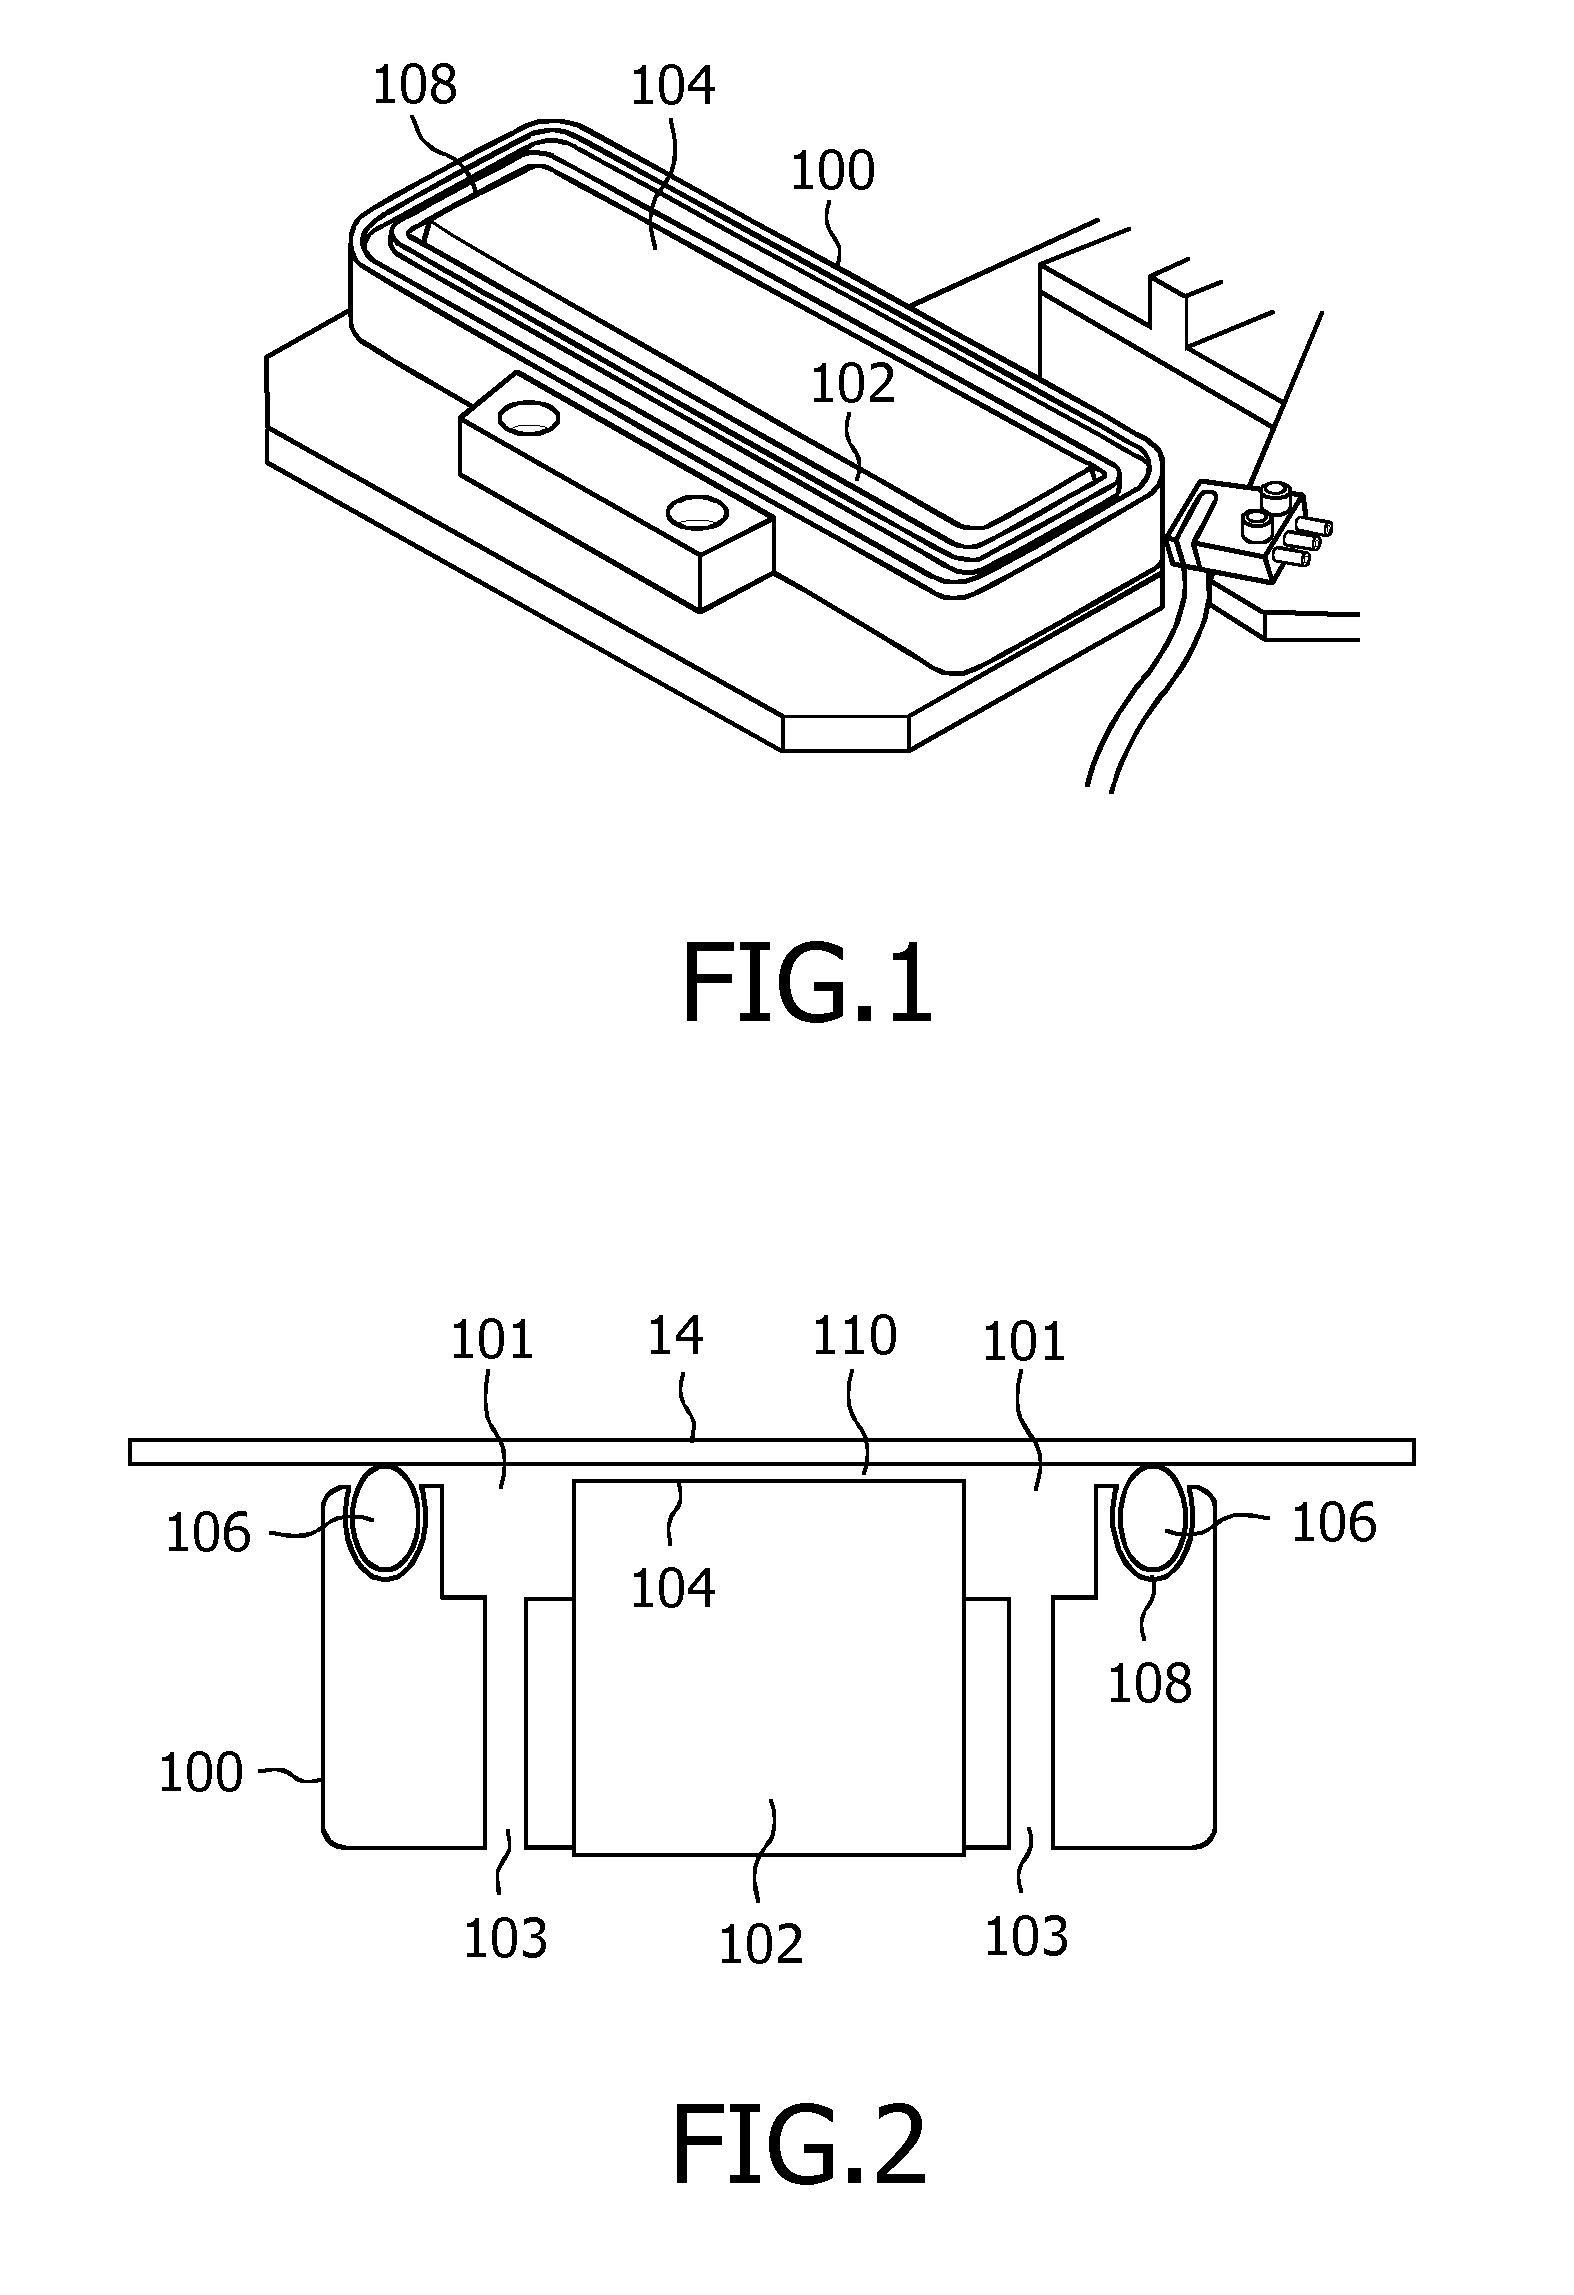 Transducer Unit Incorporating an Acoustic Coupler